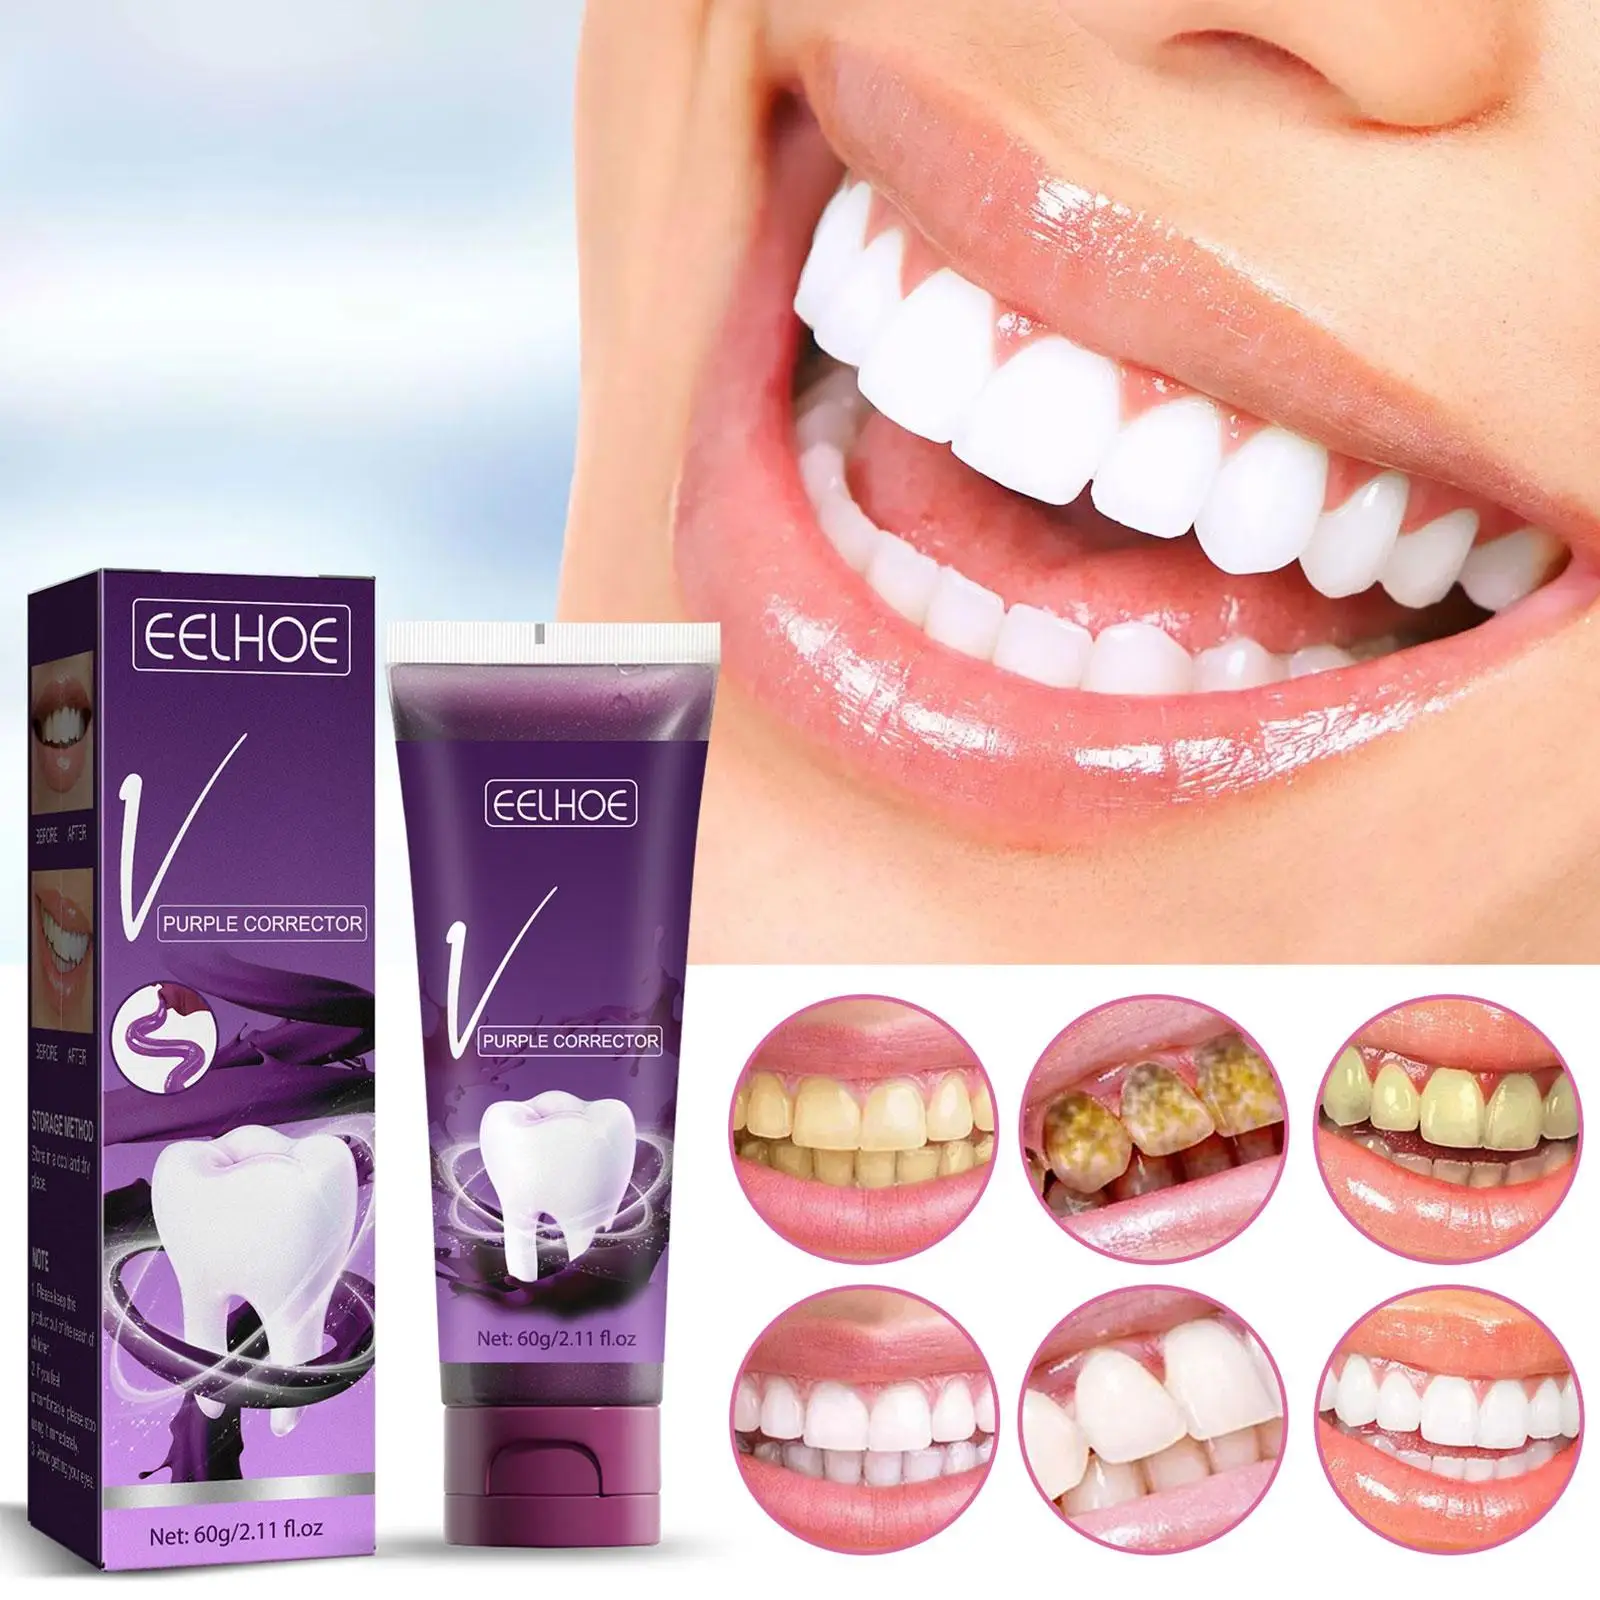 

Purple Whitening Toothpaste Removes Stains Teeth Oral Hygiene Mousse Colour Corrector Breathing Freshener Toothpaste 60g